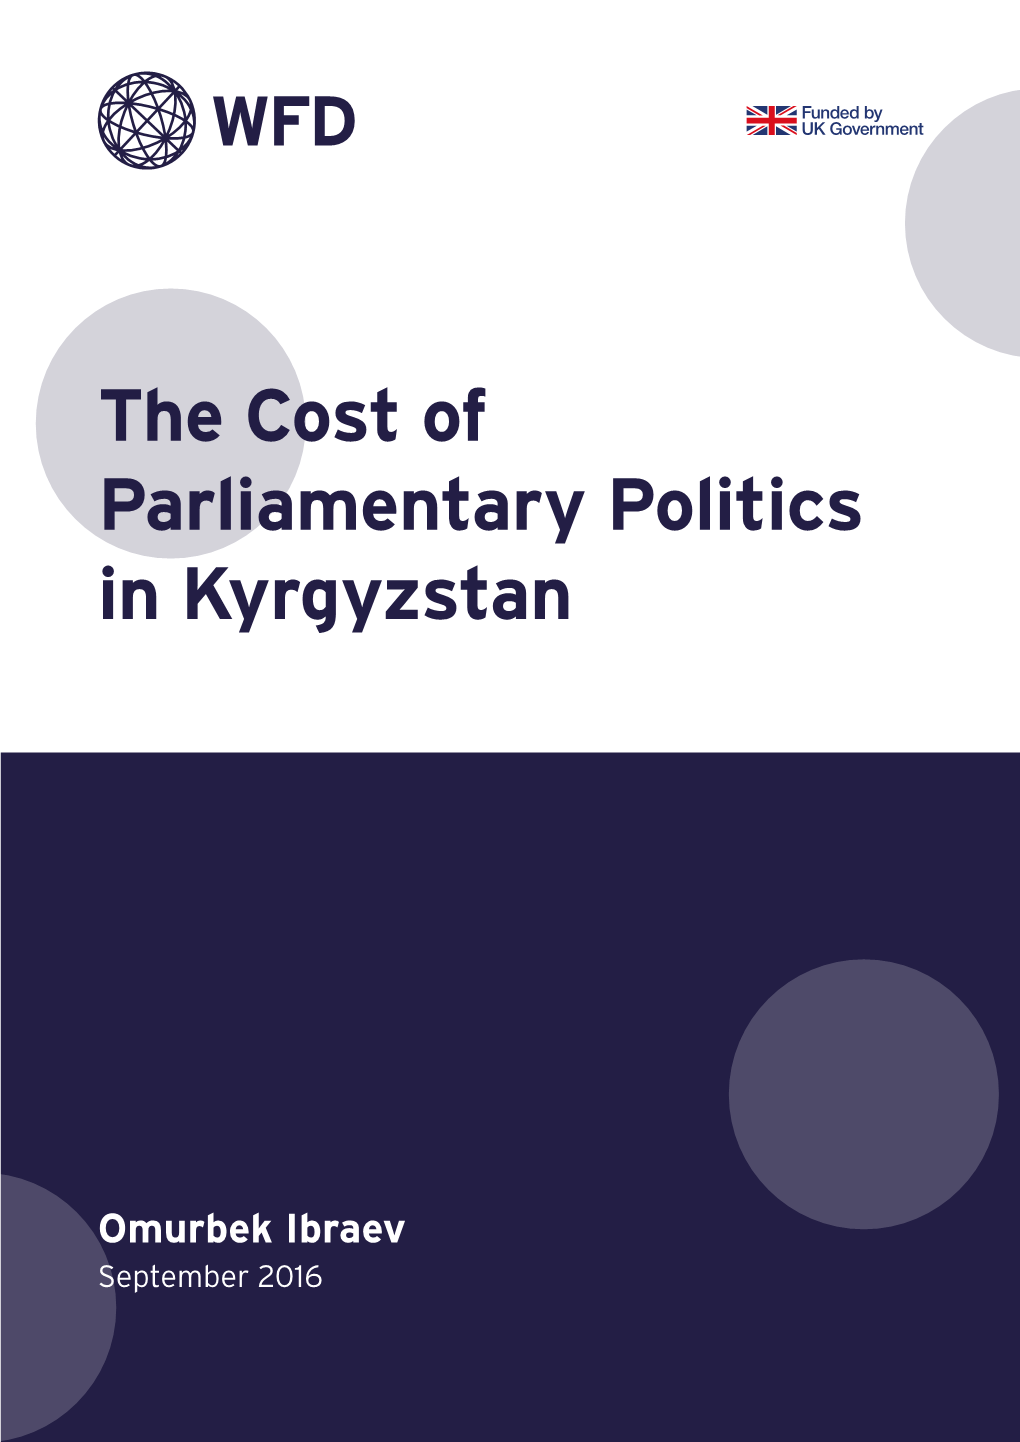 The Cost of Parliamentary Politics in Kyrgyzstan